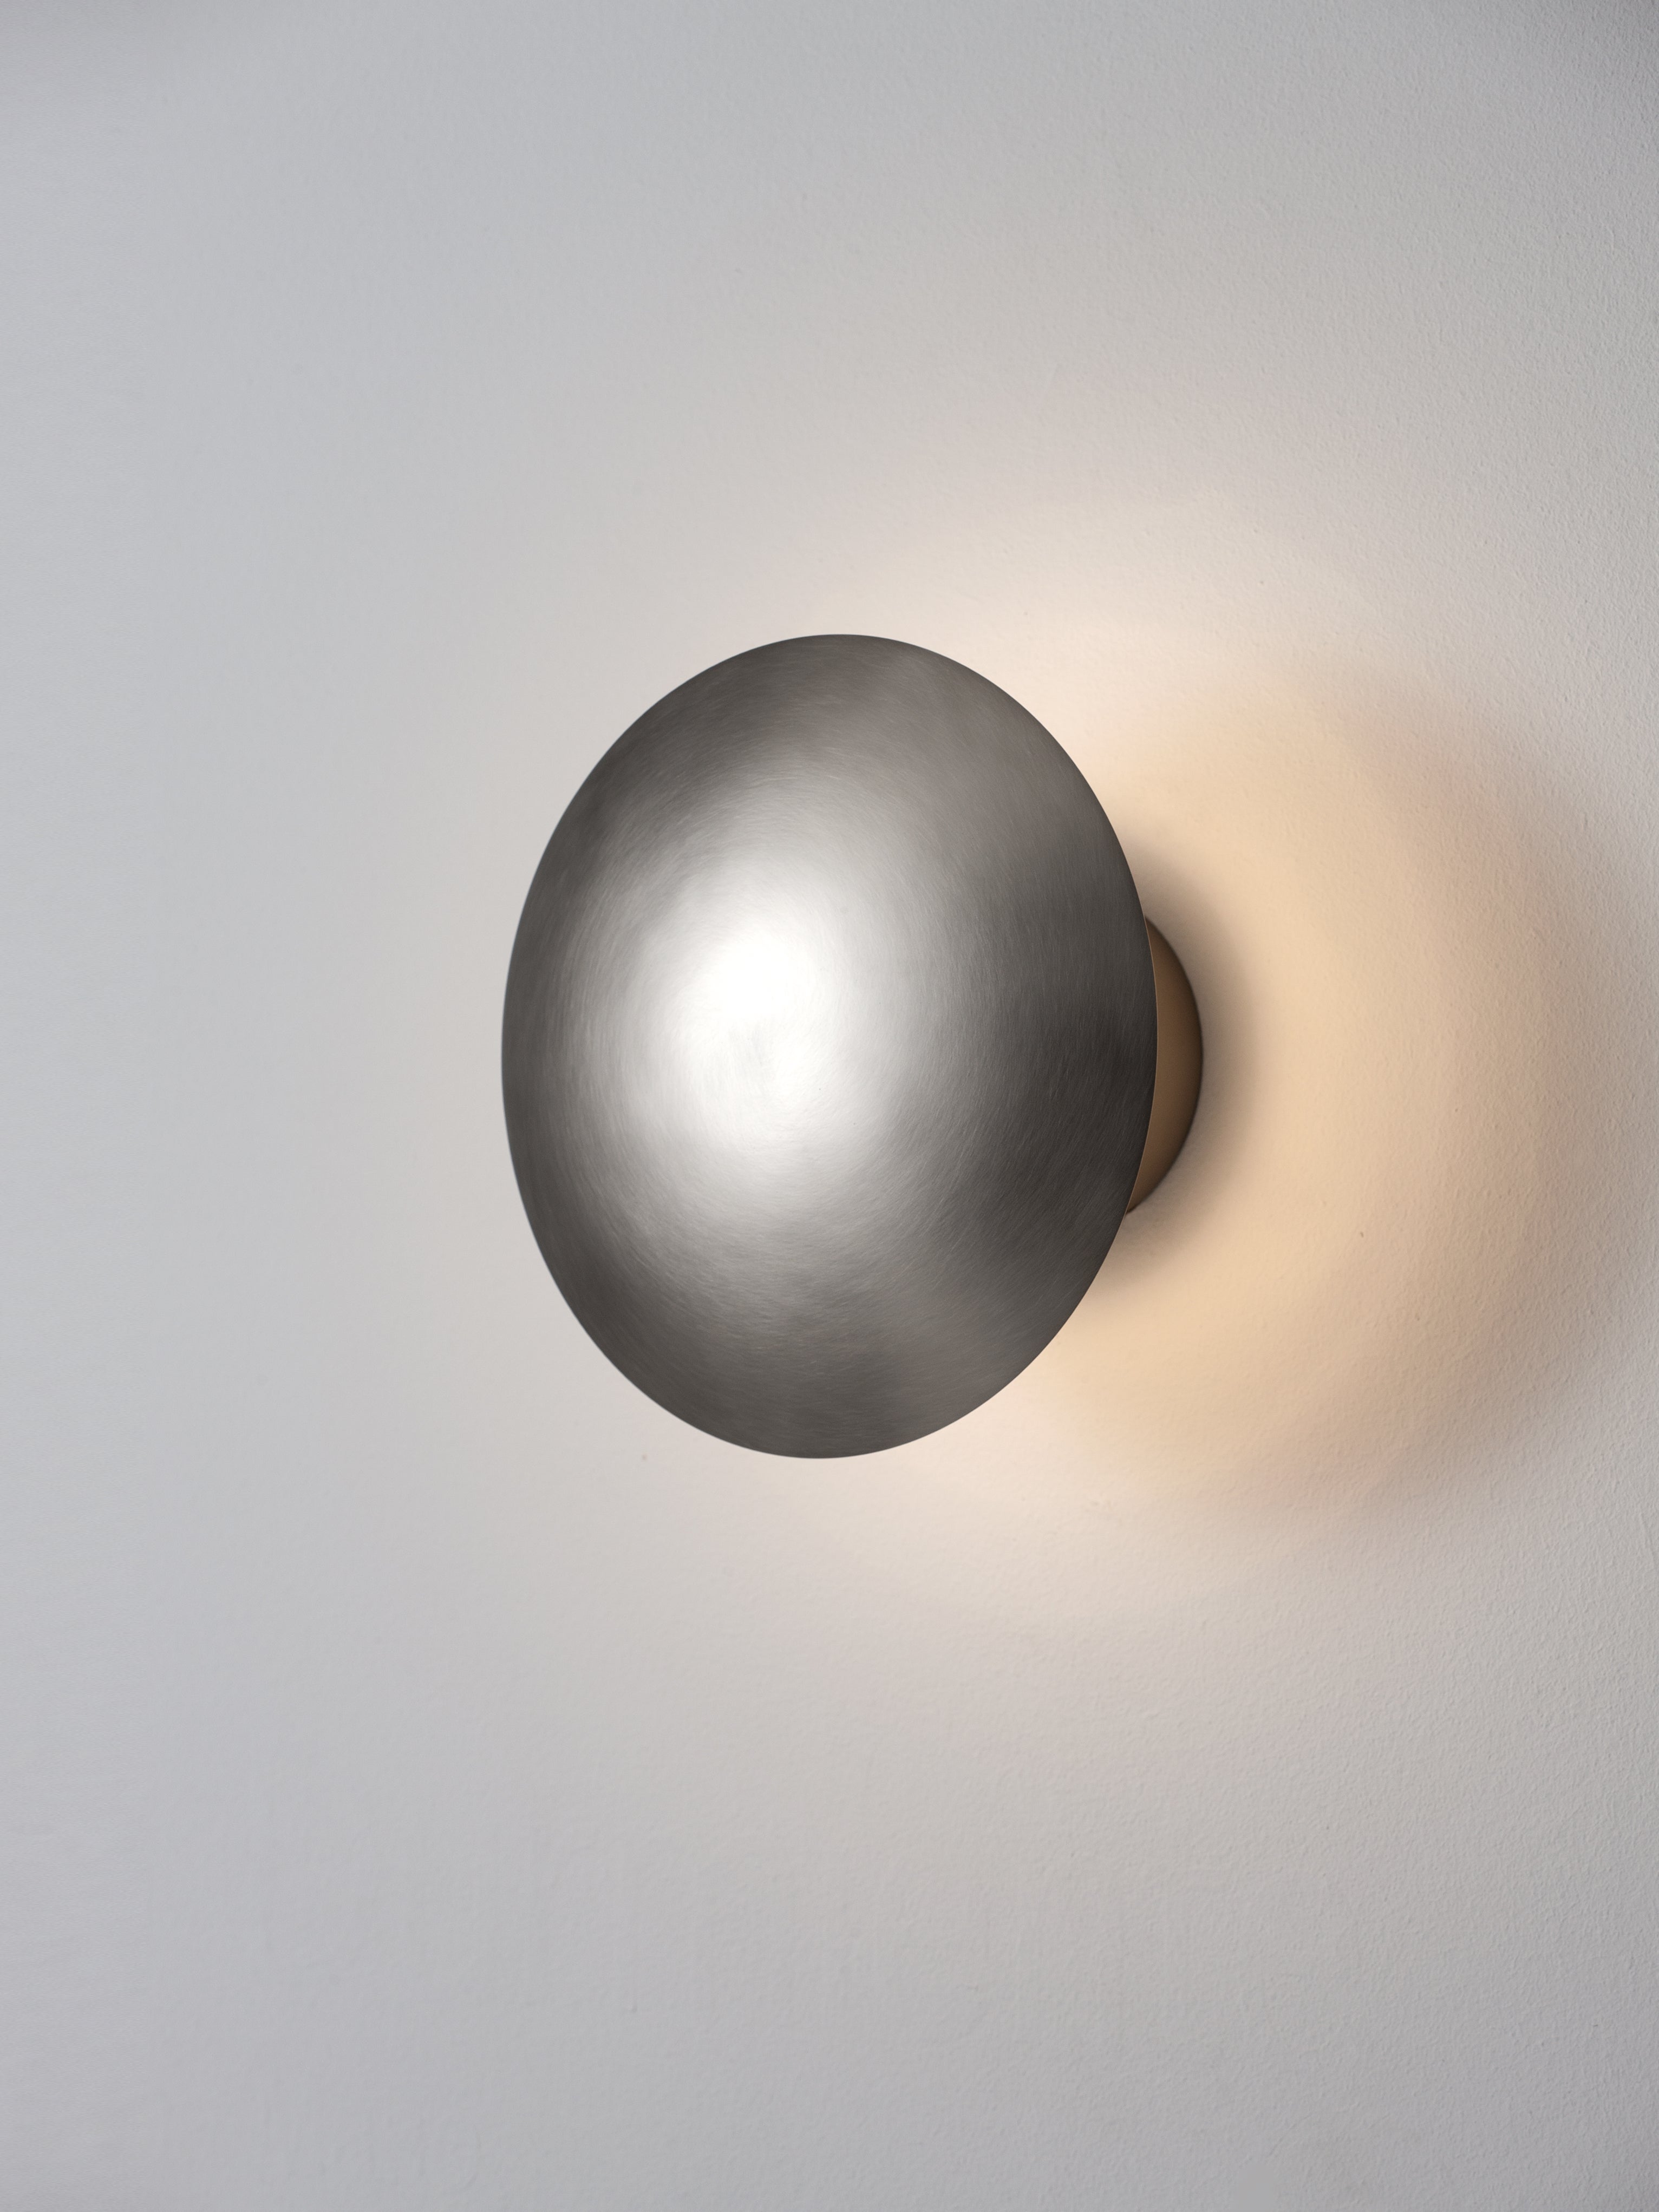 Medium Disco wall lamp by Jordi Miralbell, Mariona Raventós
Dimensions: D 24 x W 13 x H 24 cm
Materials: Metal.
Available in 2 sizes: D24, D35 cm.

This metallic disc, available in two sizes, M and L, reflects its light on the wall, creating a